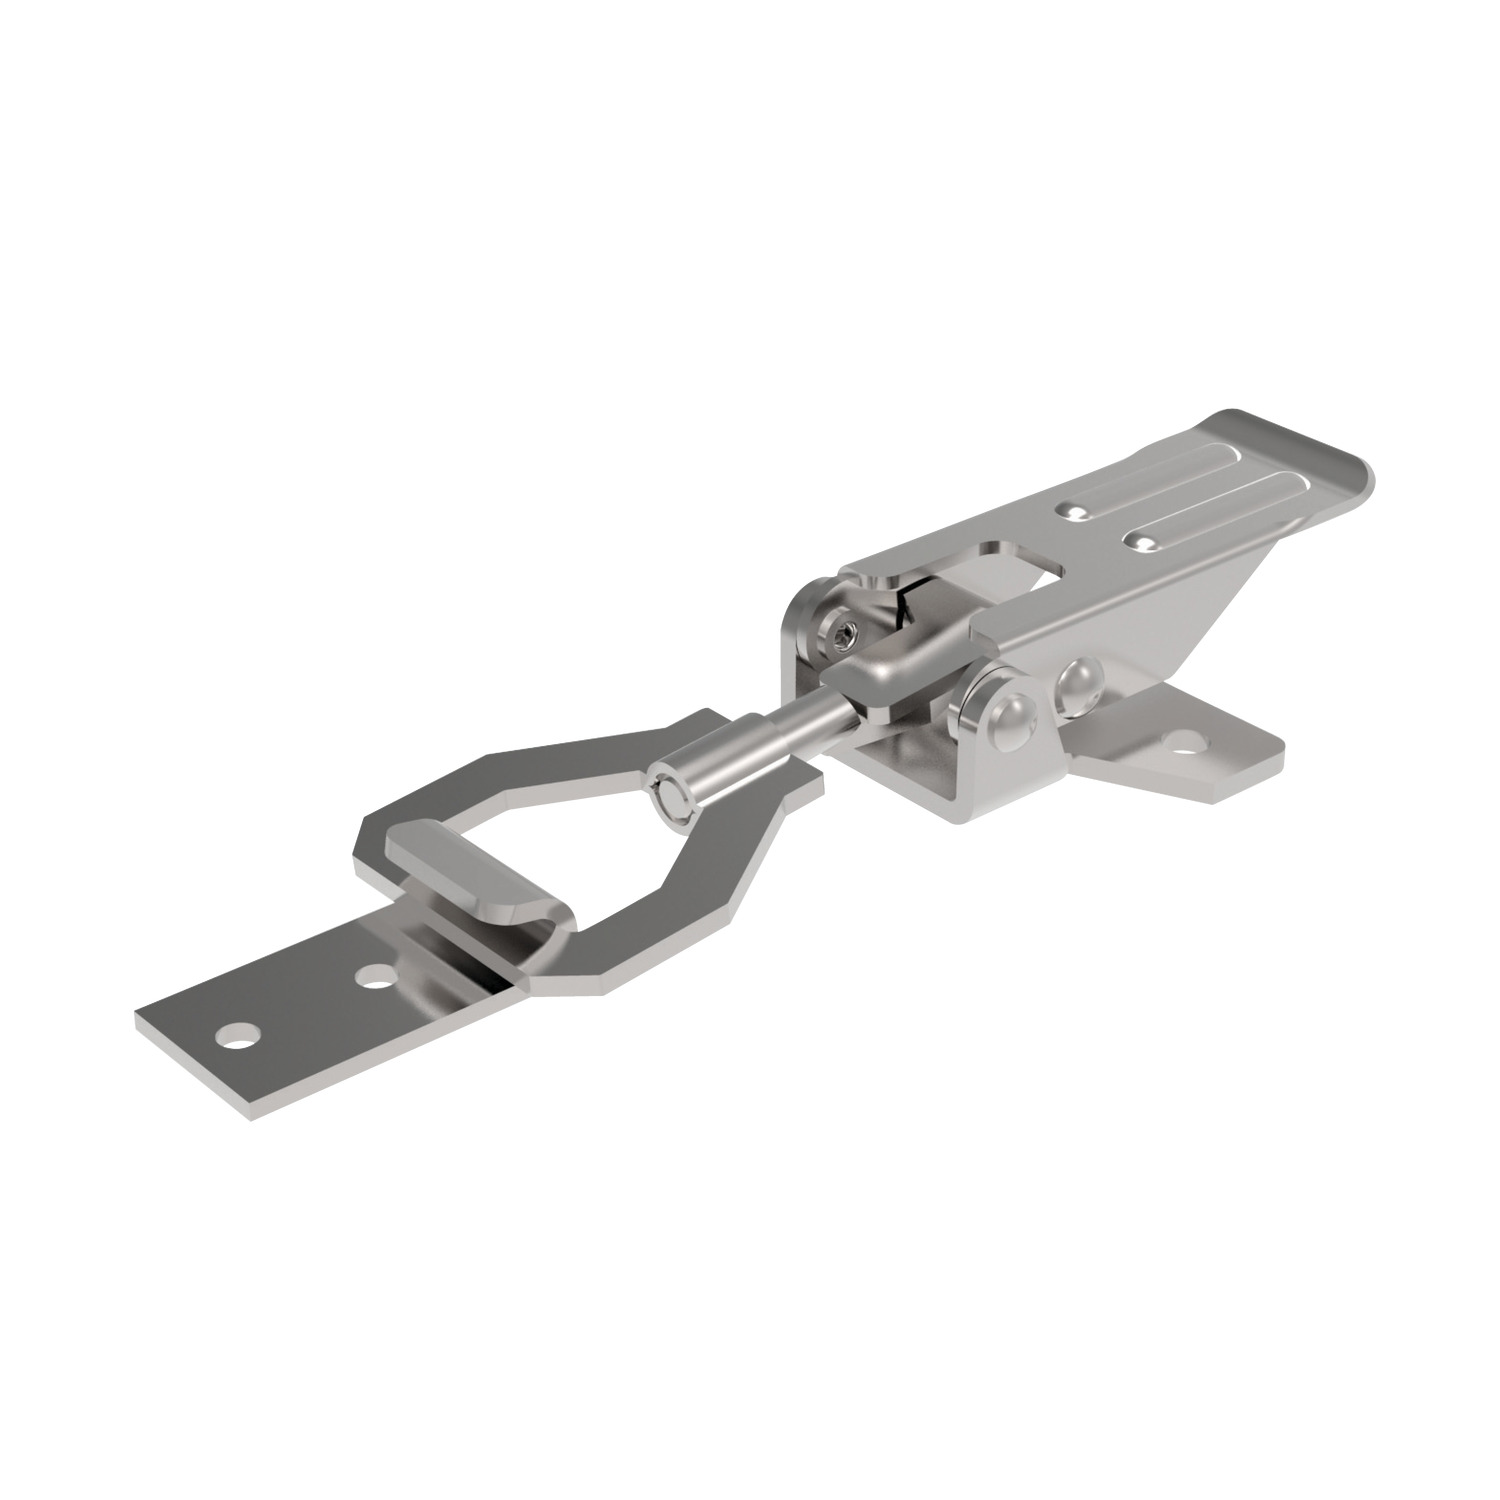 Toggle Latches Stroke adjustment of upto 12mm, this front strike mounting draw latch is available in steel and AISI 304 stainless.